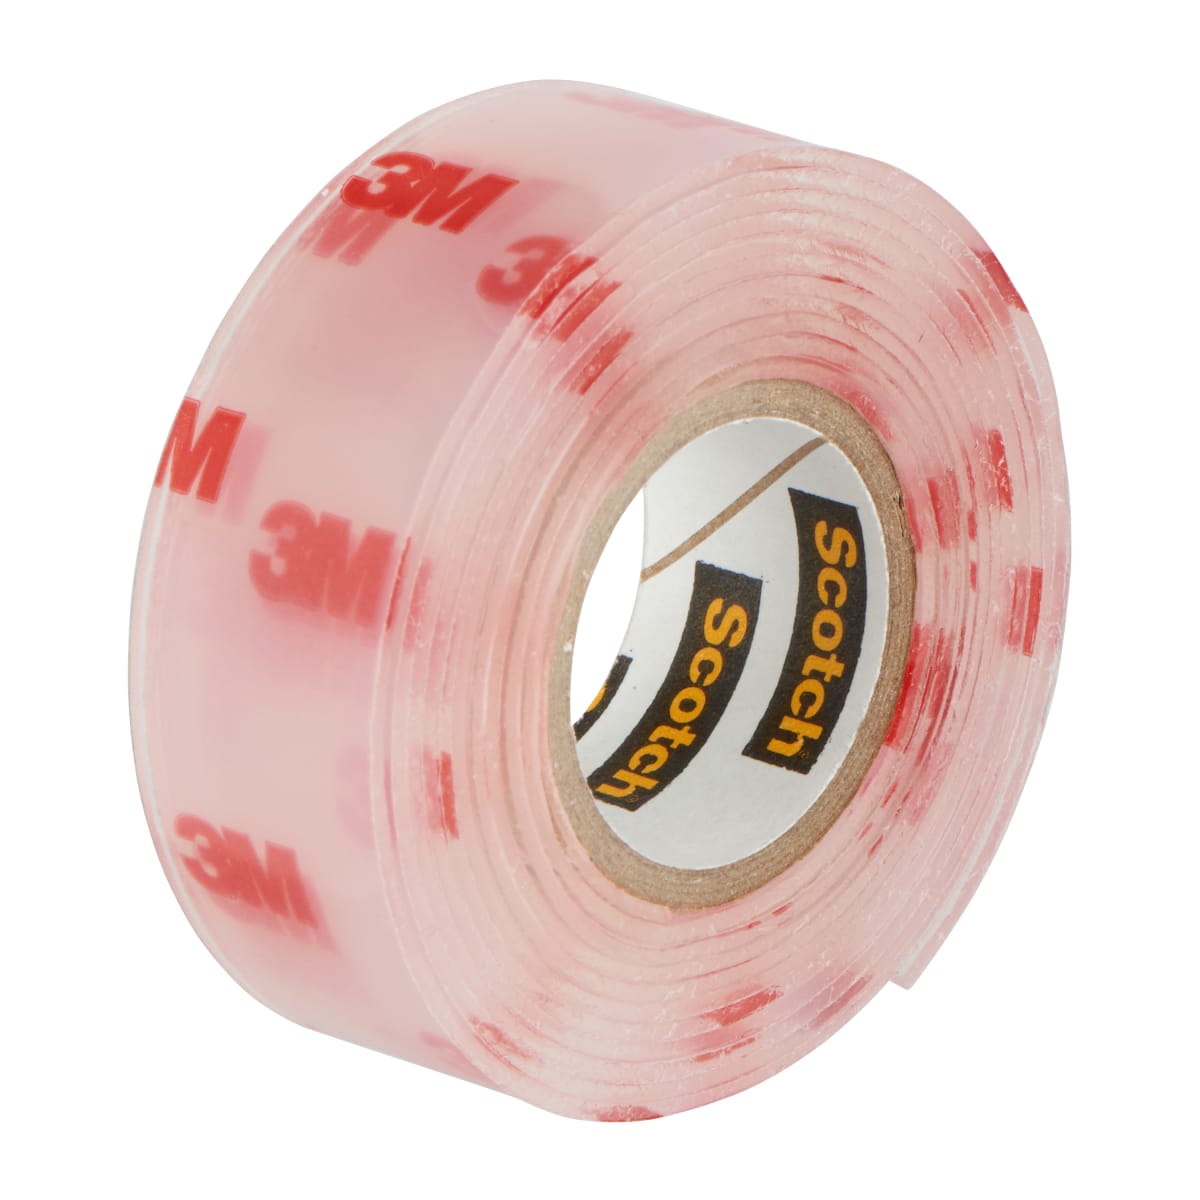 TRANSPARENT FIXING TAPE SCOTCH-FIXEXTREME UP TO 7 KG 19 MM X 1.5 M